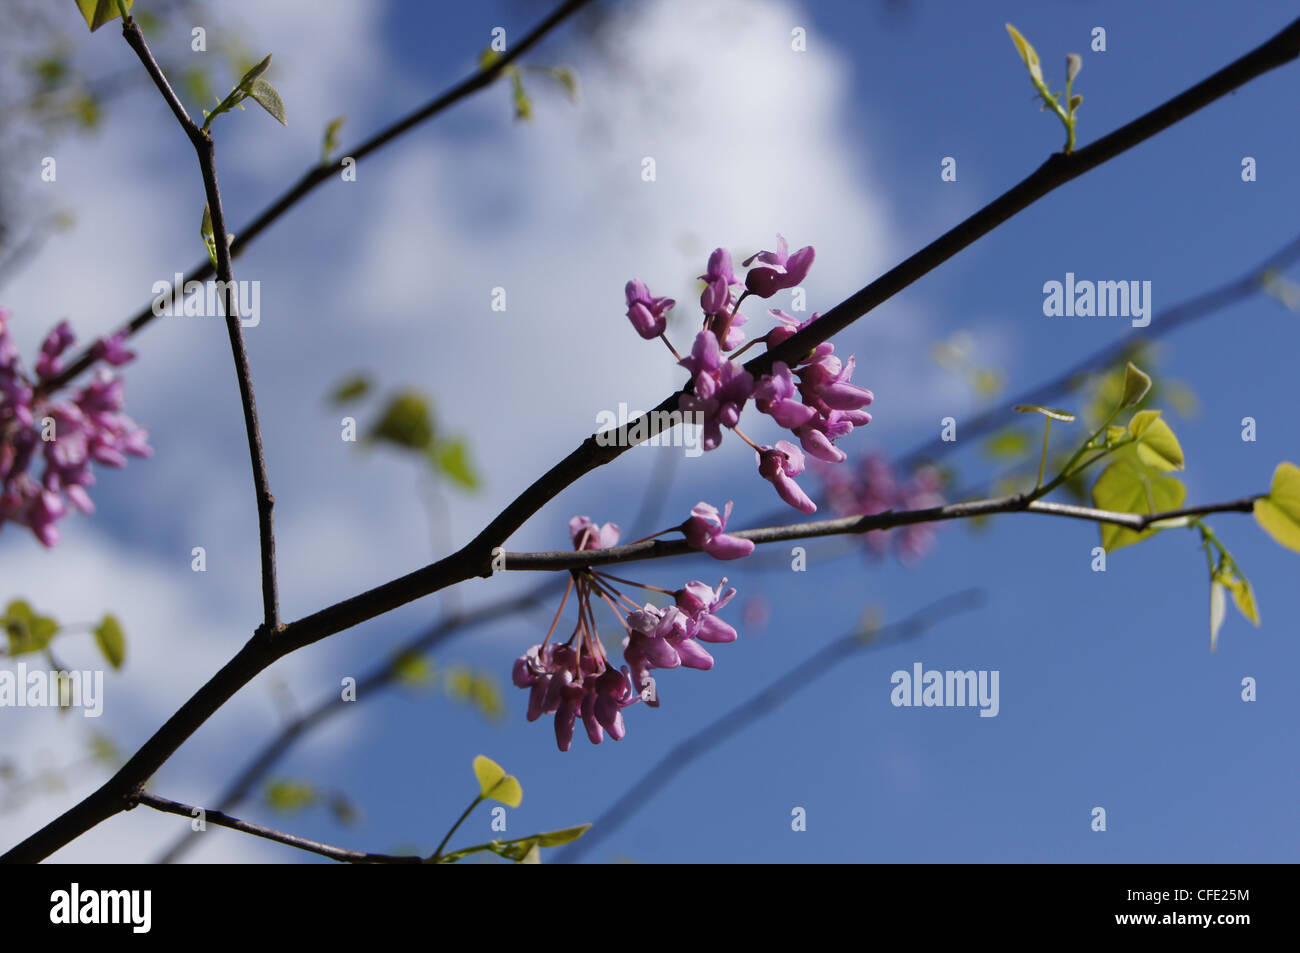 Eastern Redbud Cercis canadensis native flowering tree branch Stock Photo